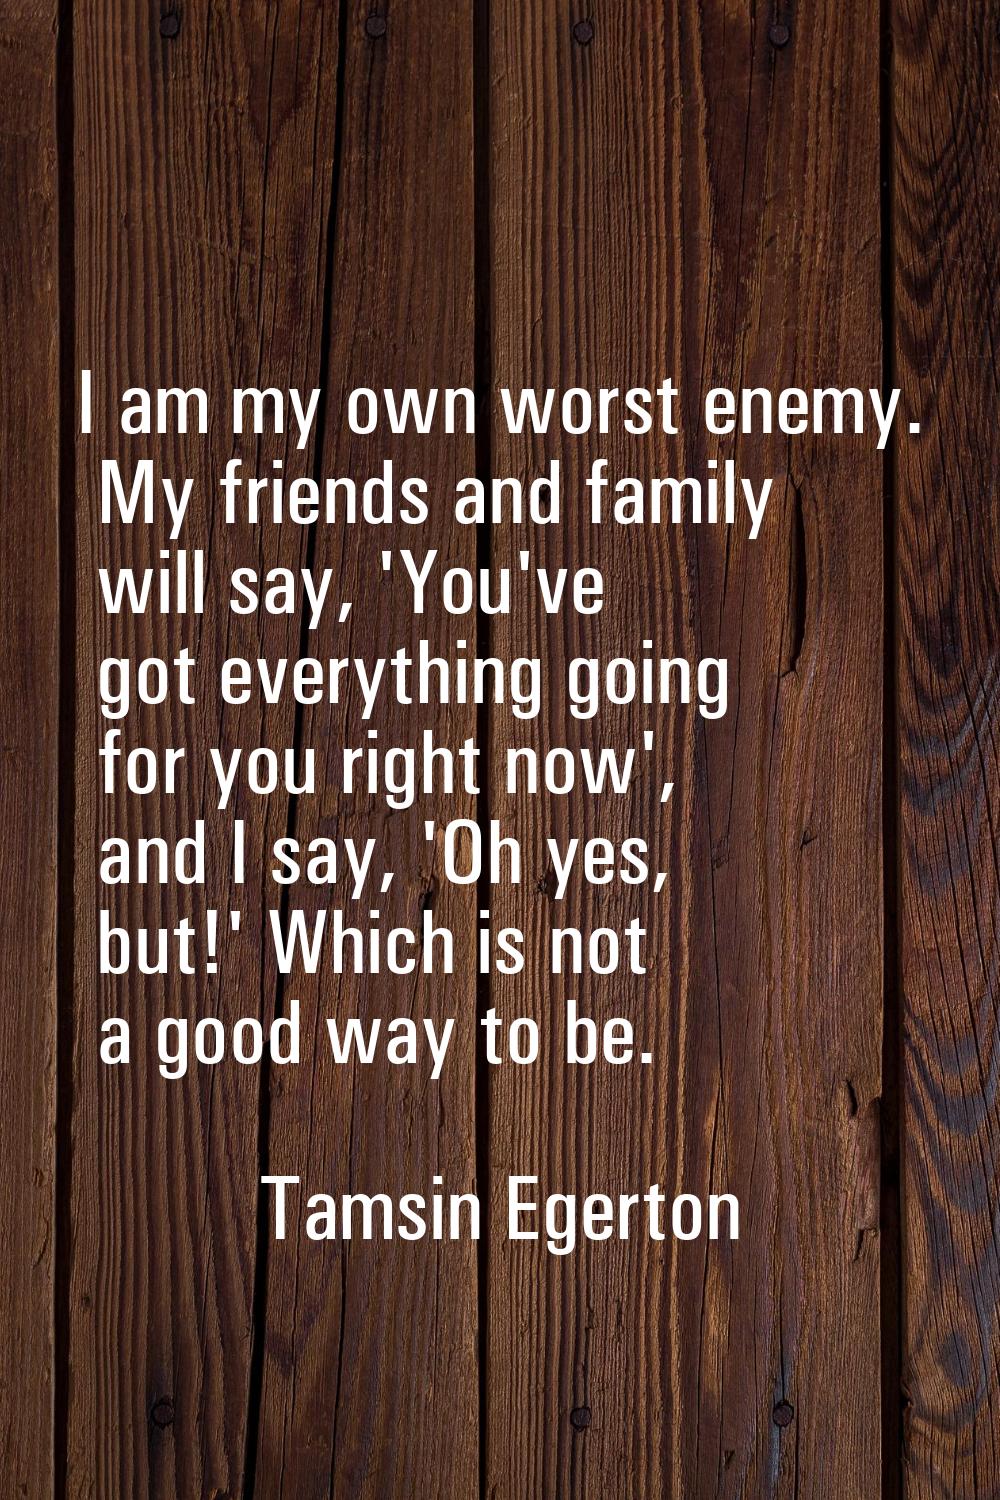 I am my own worst enemy. My friends and family will say, 'You've got everything going for you right